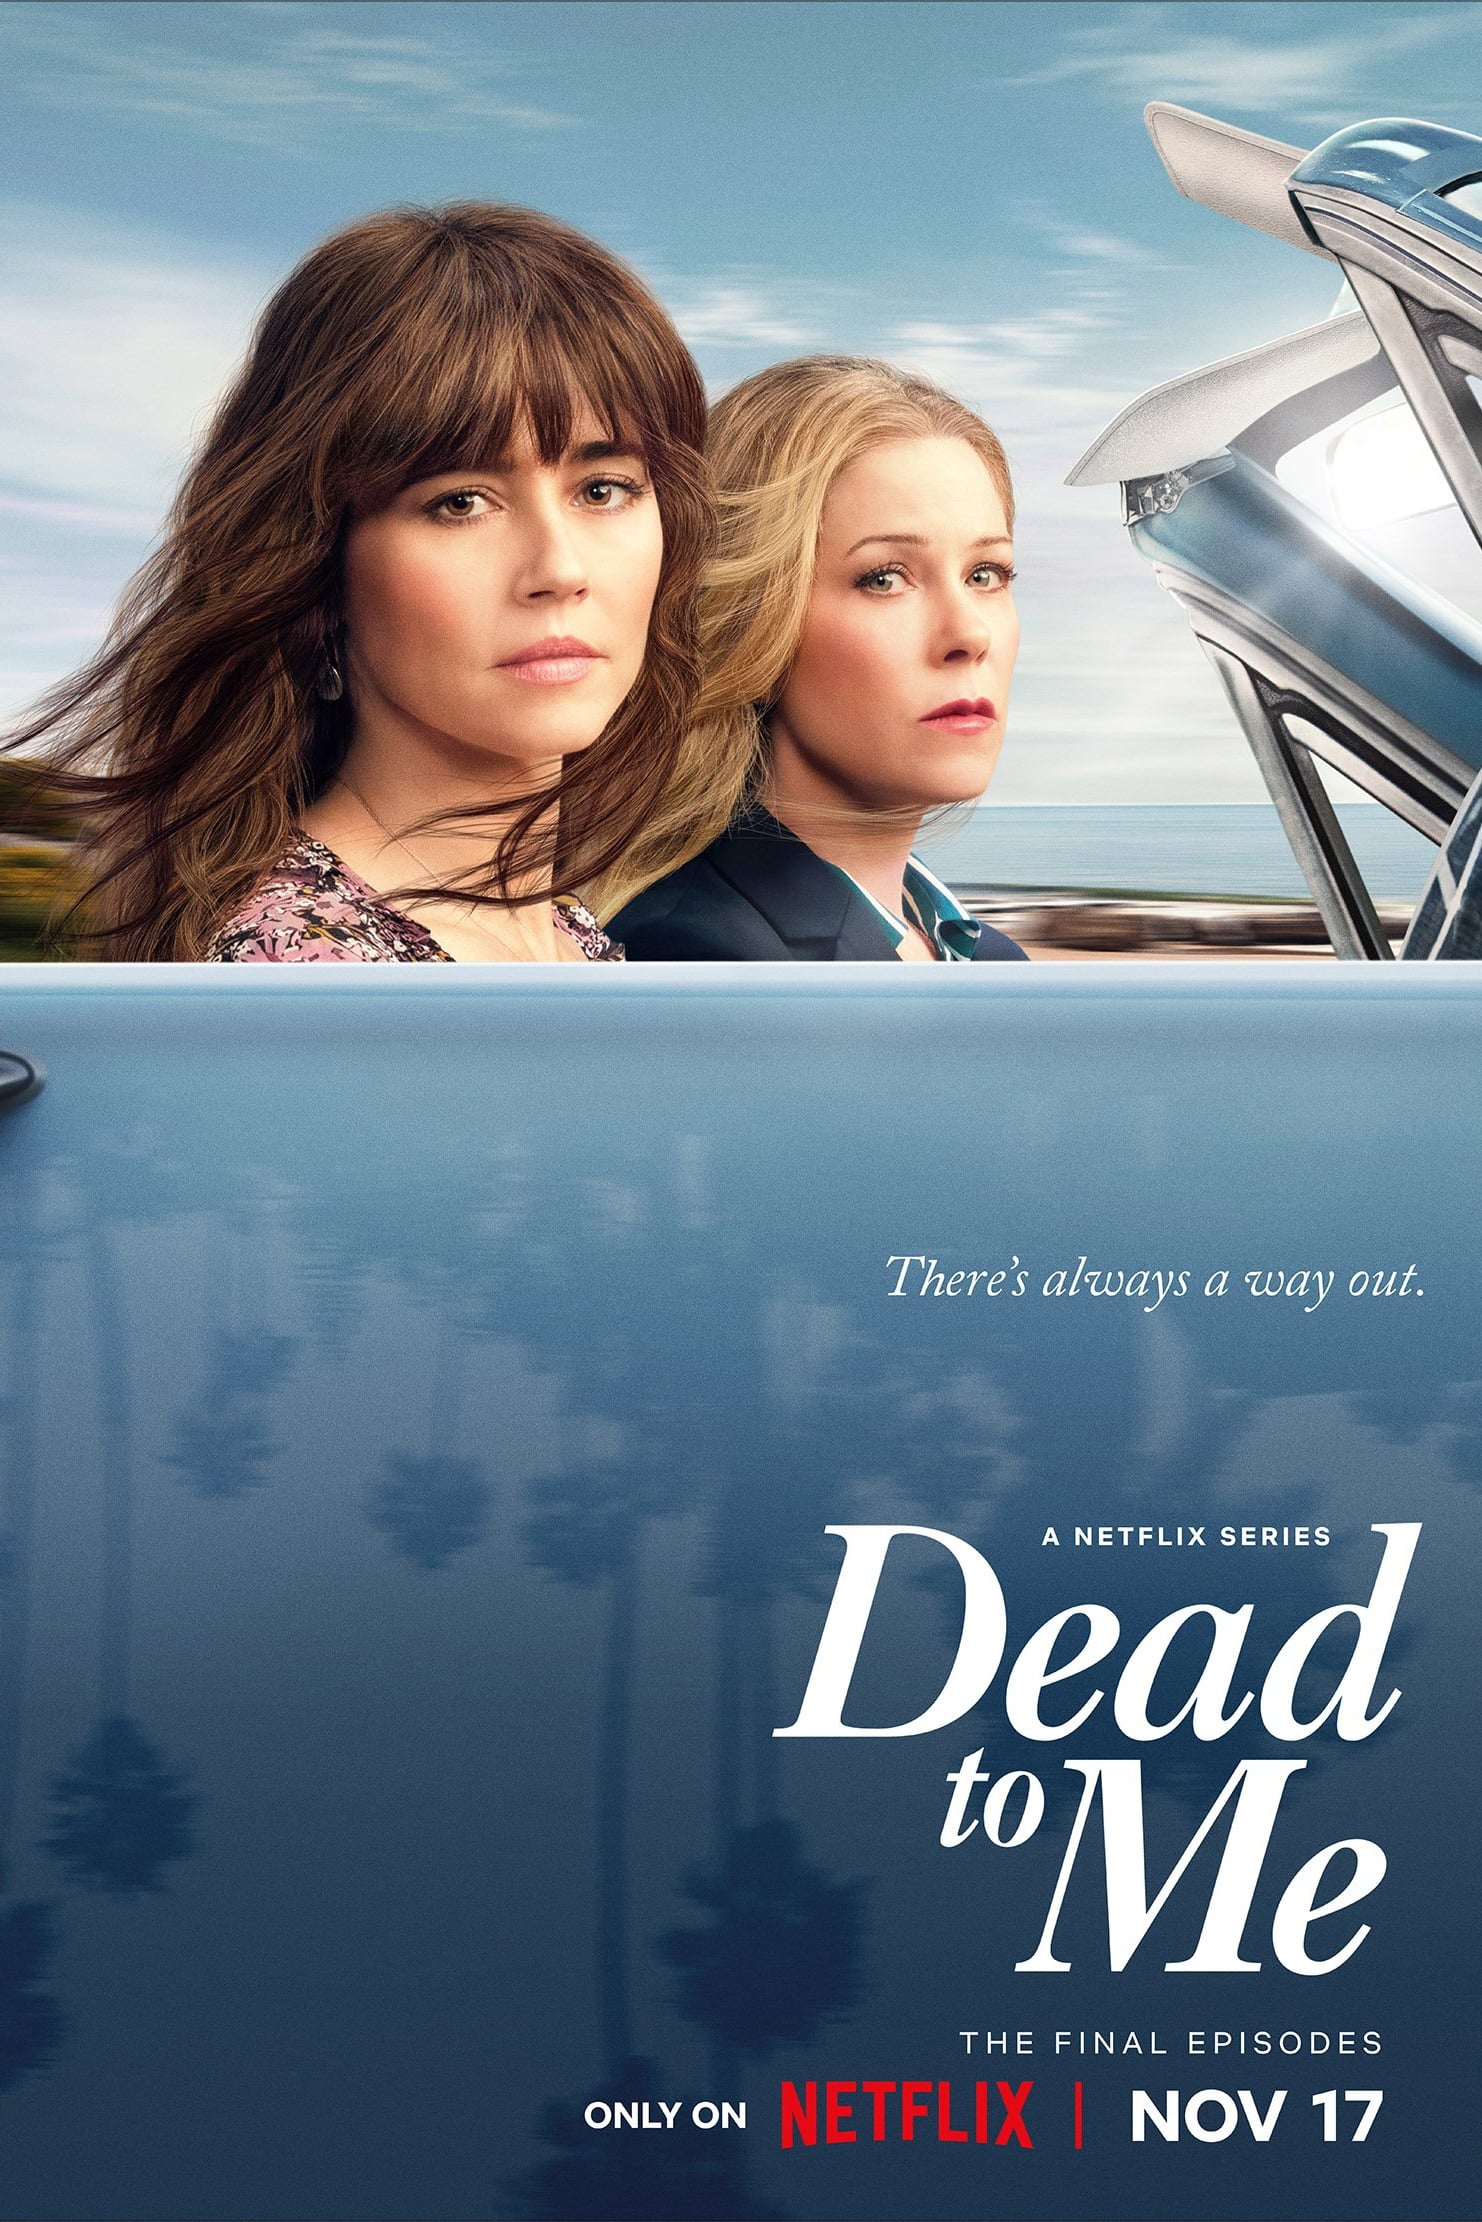 Dead to Me (2022) 720p HEVC HDRip S03 Complete NF Series [Dual Audio] [Hindi or English] x265 ESubs